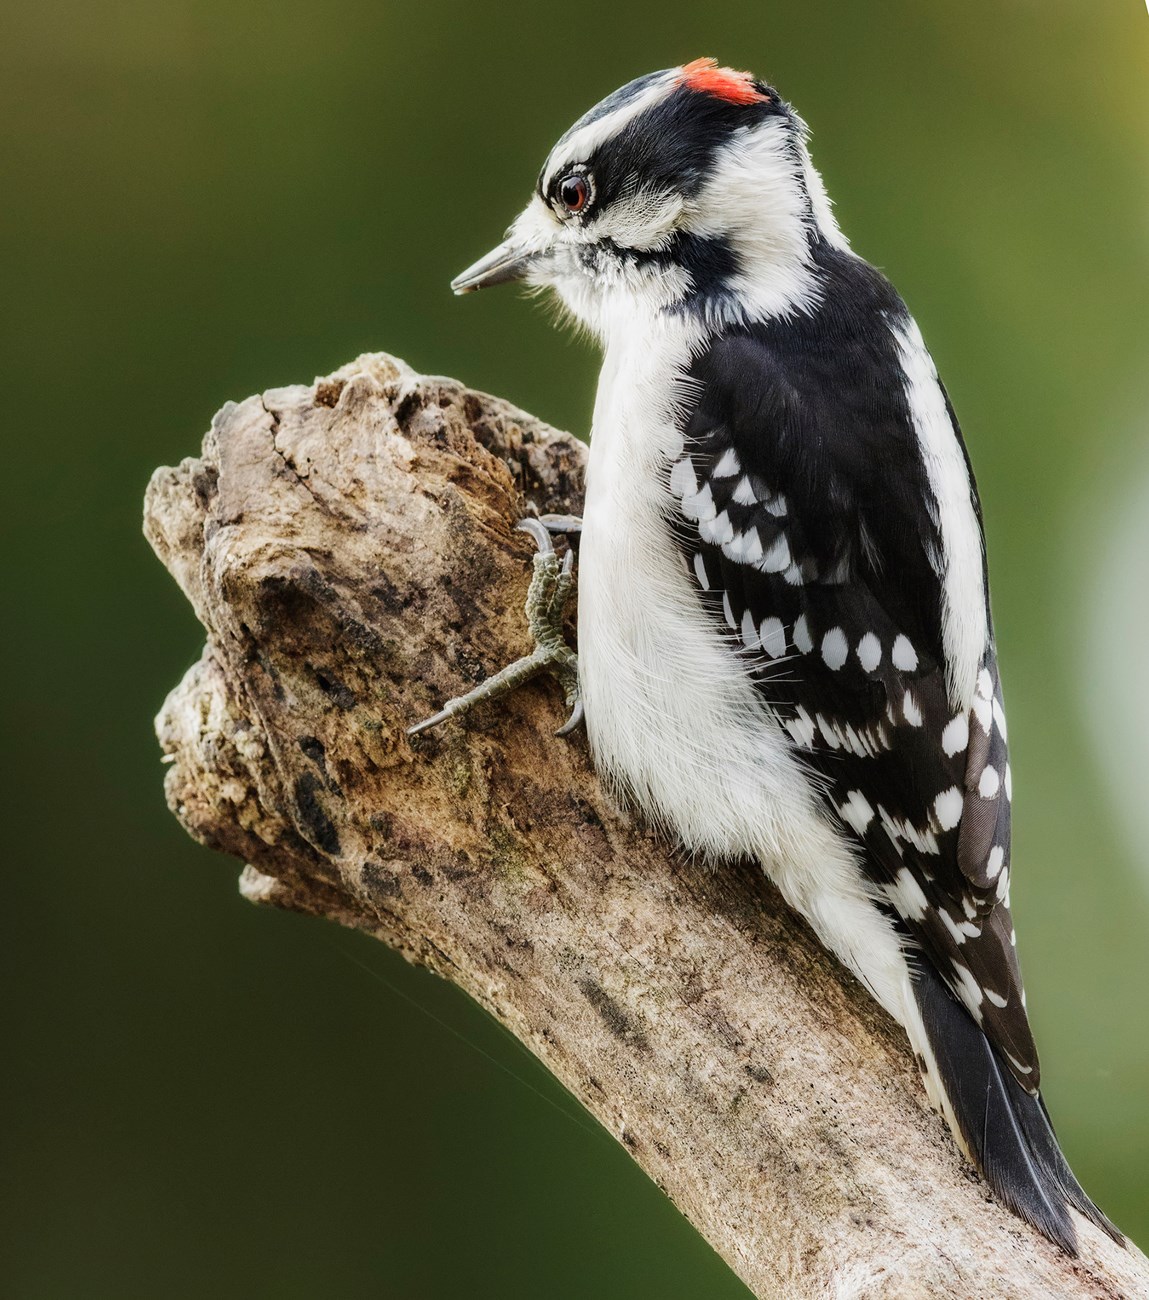 A woodpecker perched on a branch getting ready to peck.